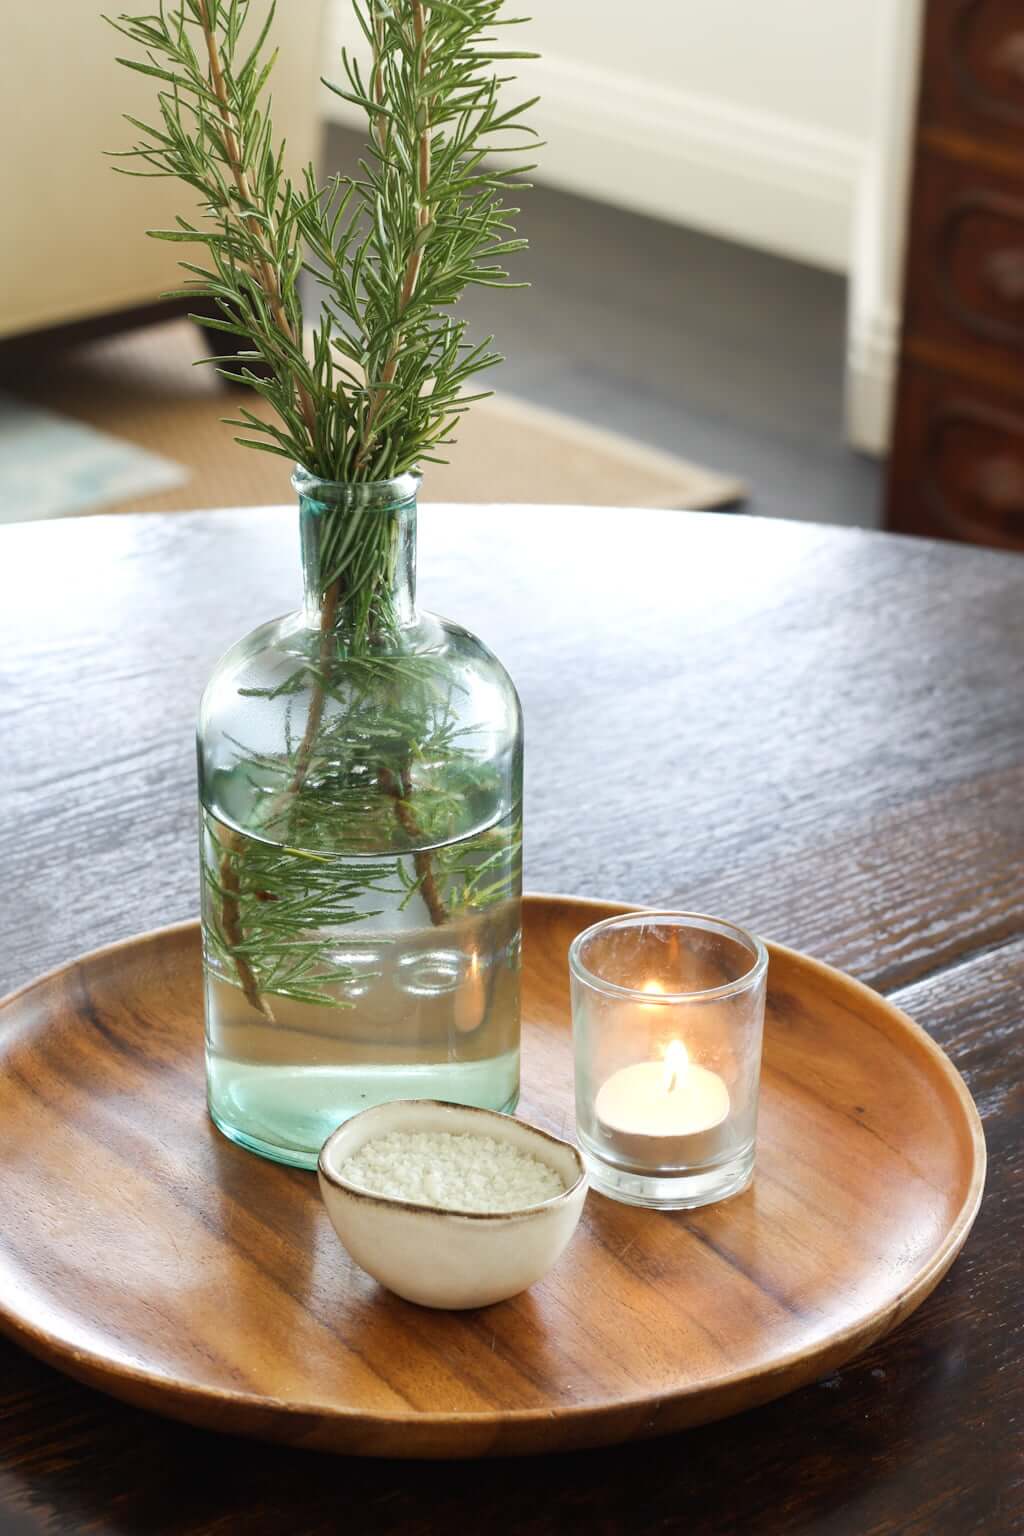 wood plate centerpiece with rosemary in glass vase, candle, and salt bowl